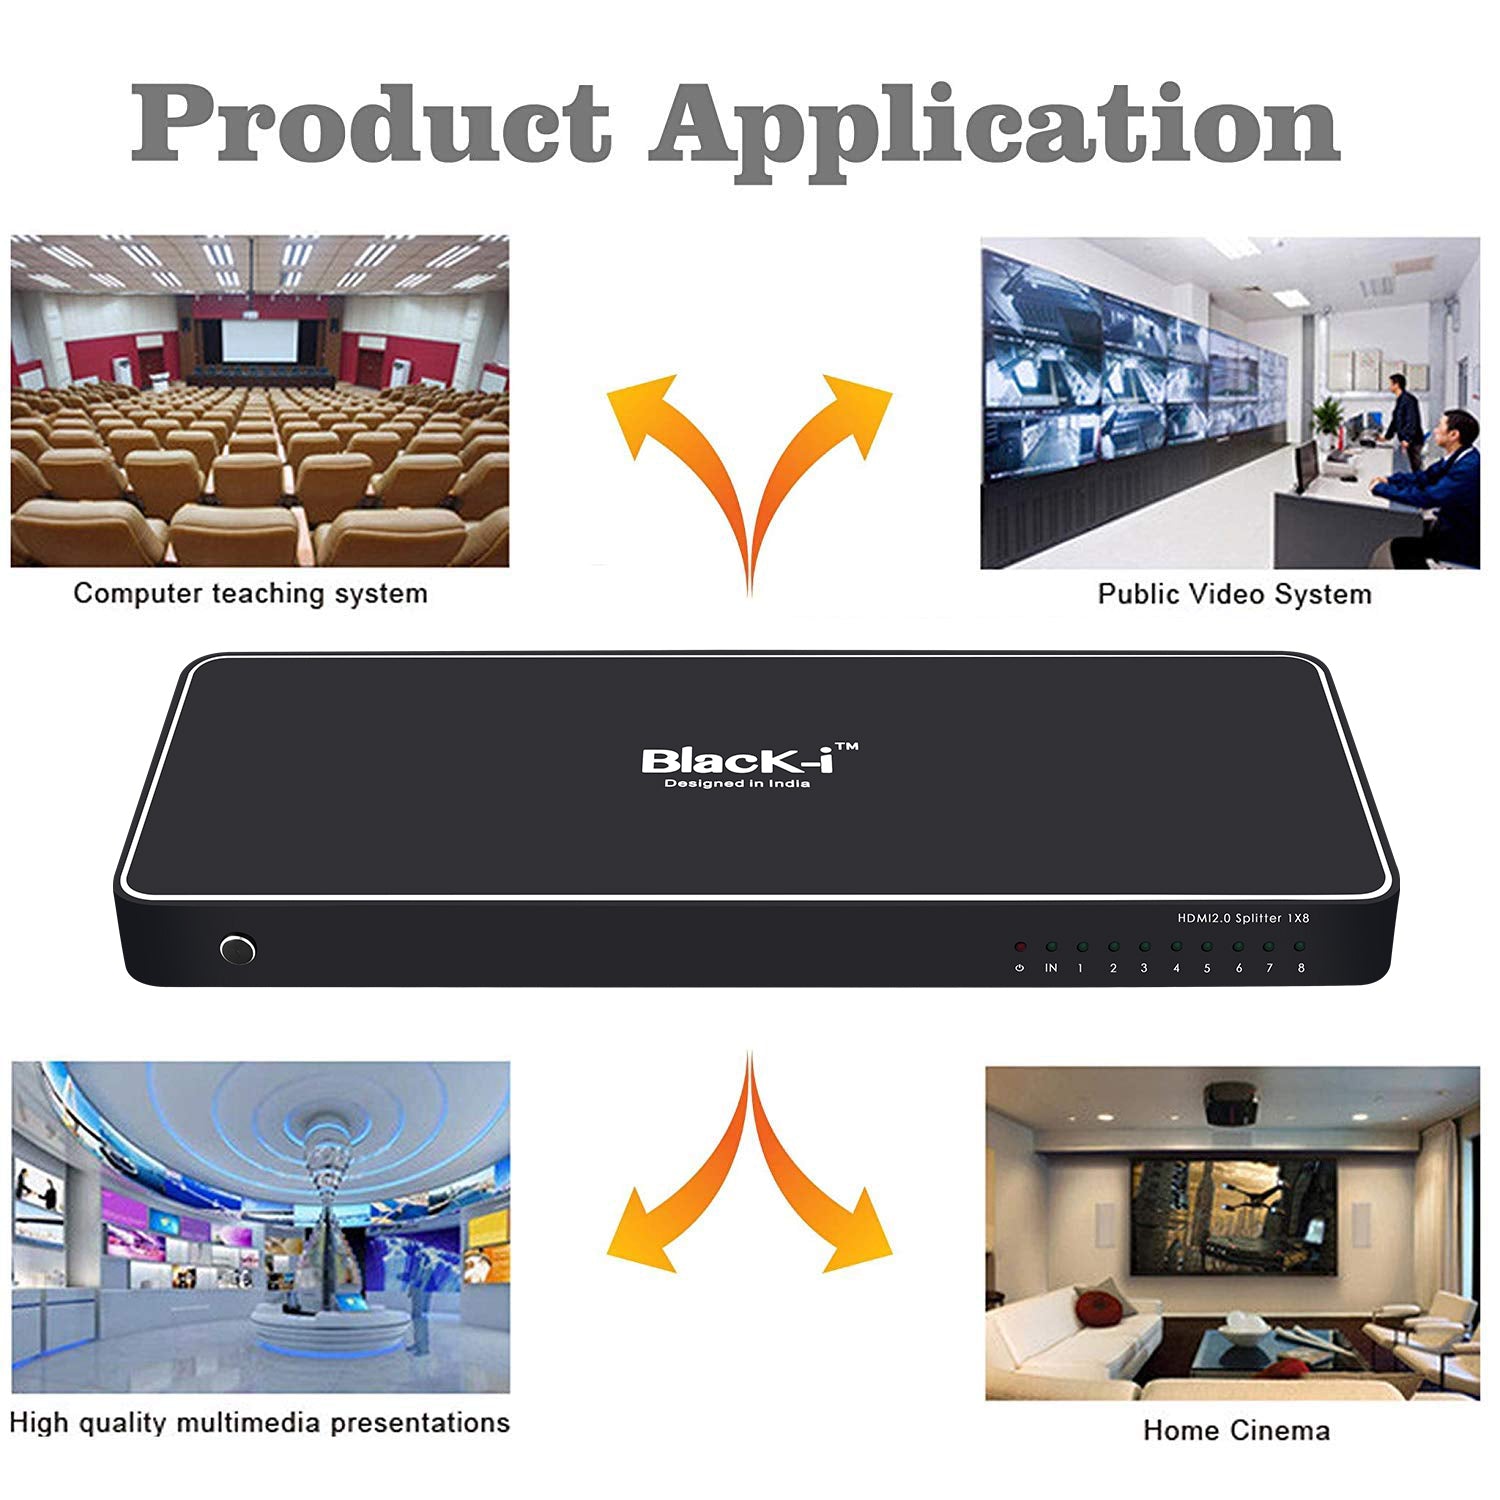 Black-i HDMI 1 Input 8 Output Splitter – Expand Your Multimedia Setup with Effortless Signal Distribution